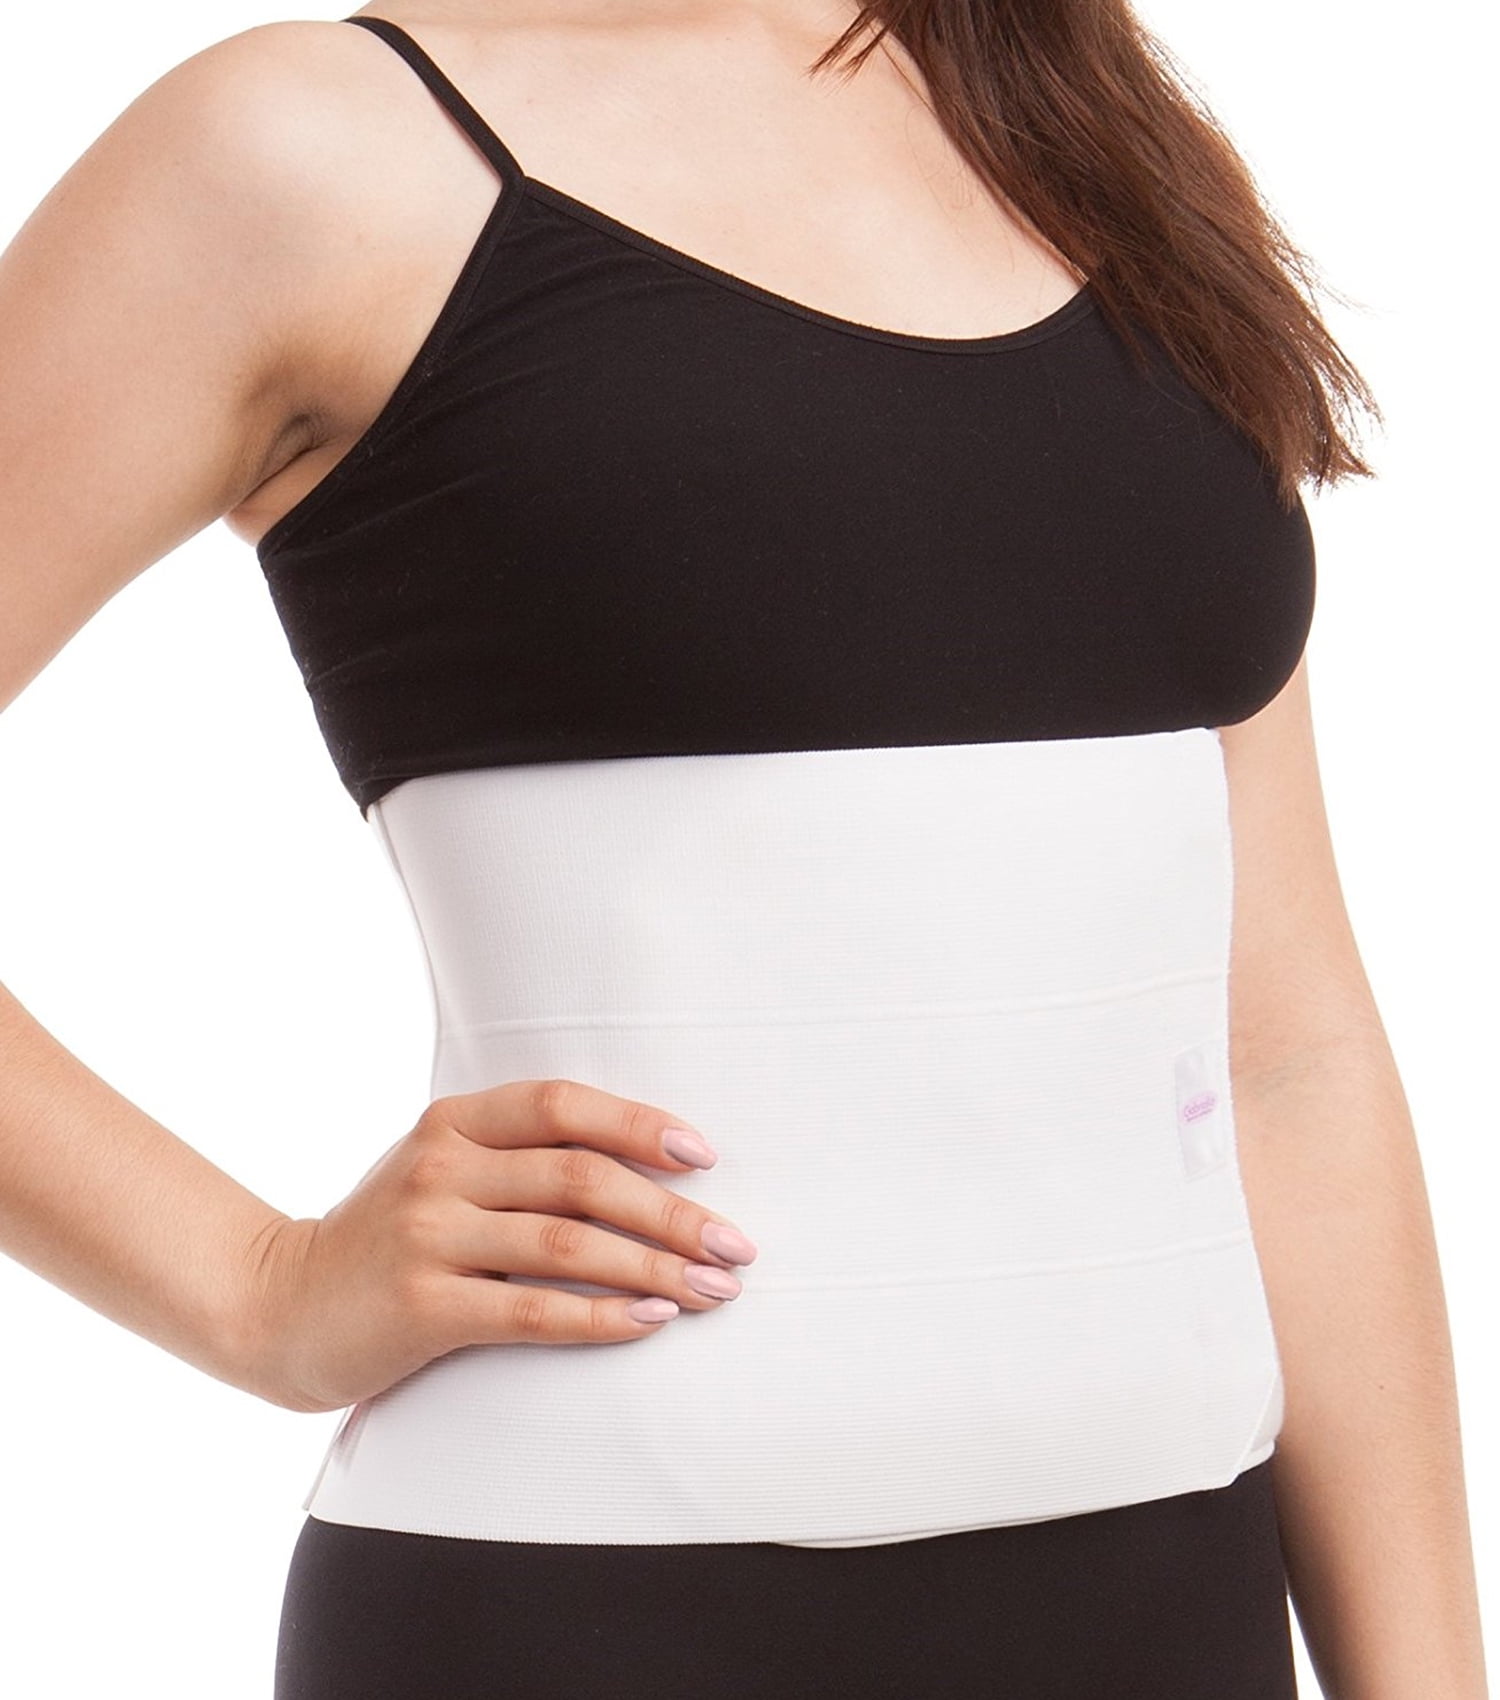 Abdominal Binder Instructions and FAQ's – AltroCare